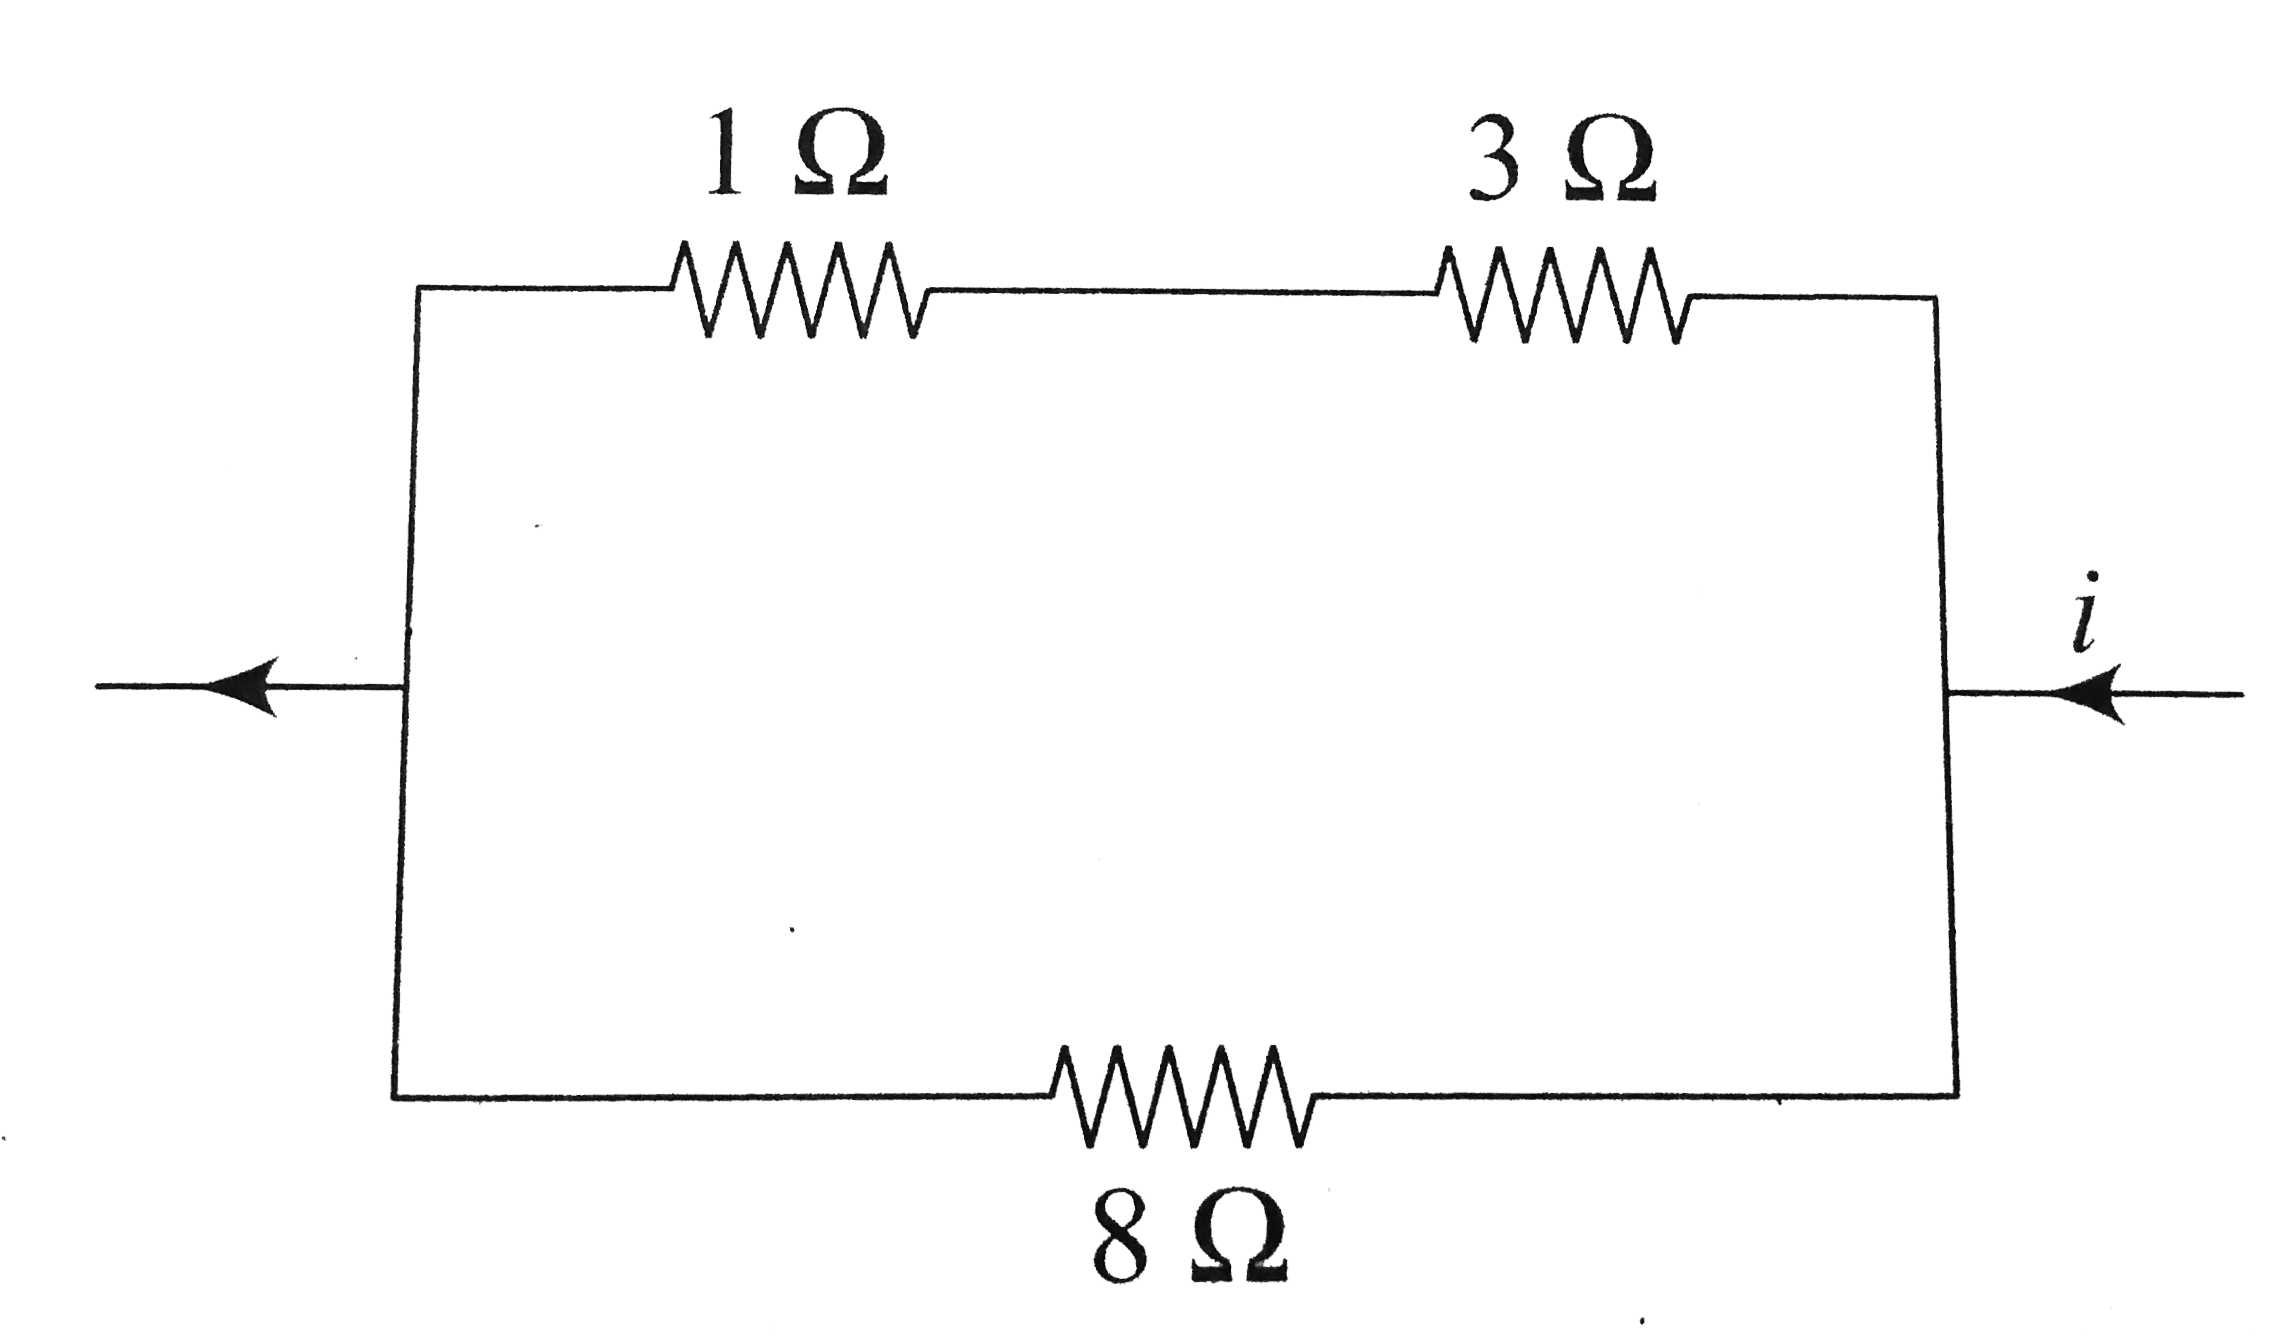 Power dissipated across the 8 Omega in the circuit shown here is 2 W. The power dissiated in watt units across the 3 Omega is